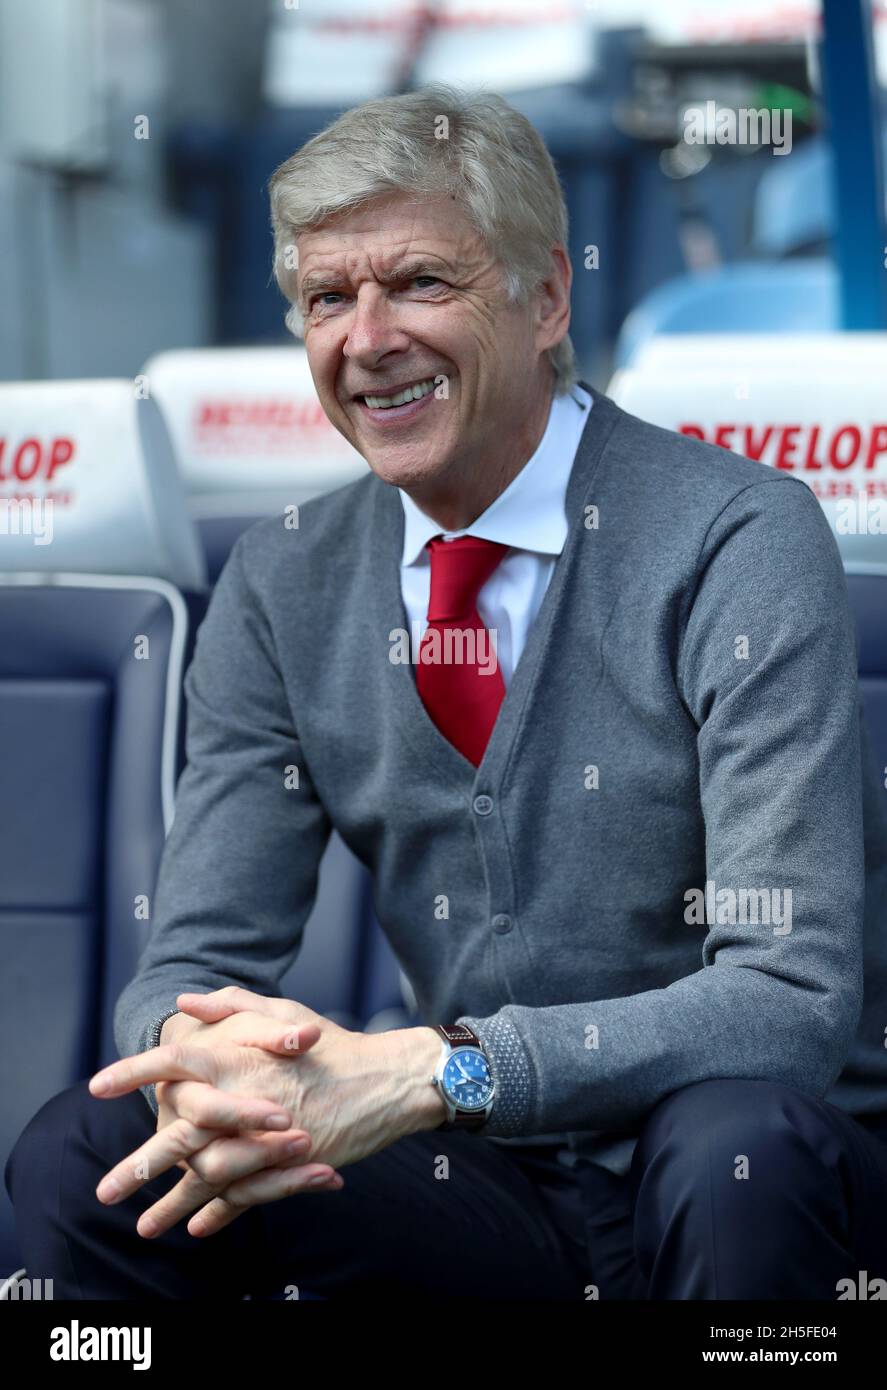 File photo dated 13-05-2018 of Arsenal manager Arsene Wenger before the Premier League match at the John Smith's Stadium, Huddersfield. The opposition to biennial World Cups is an 'emotional' response, according to Arsene Wenger. Issue date: Tuesday November 9, 2021. Stock Photo